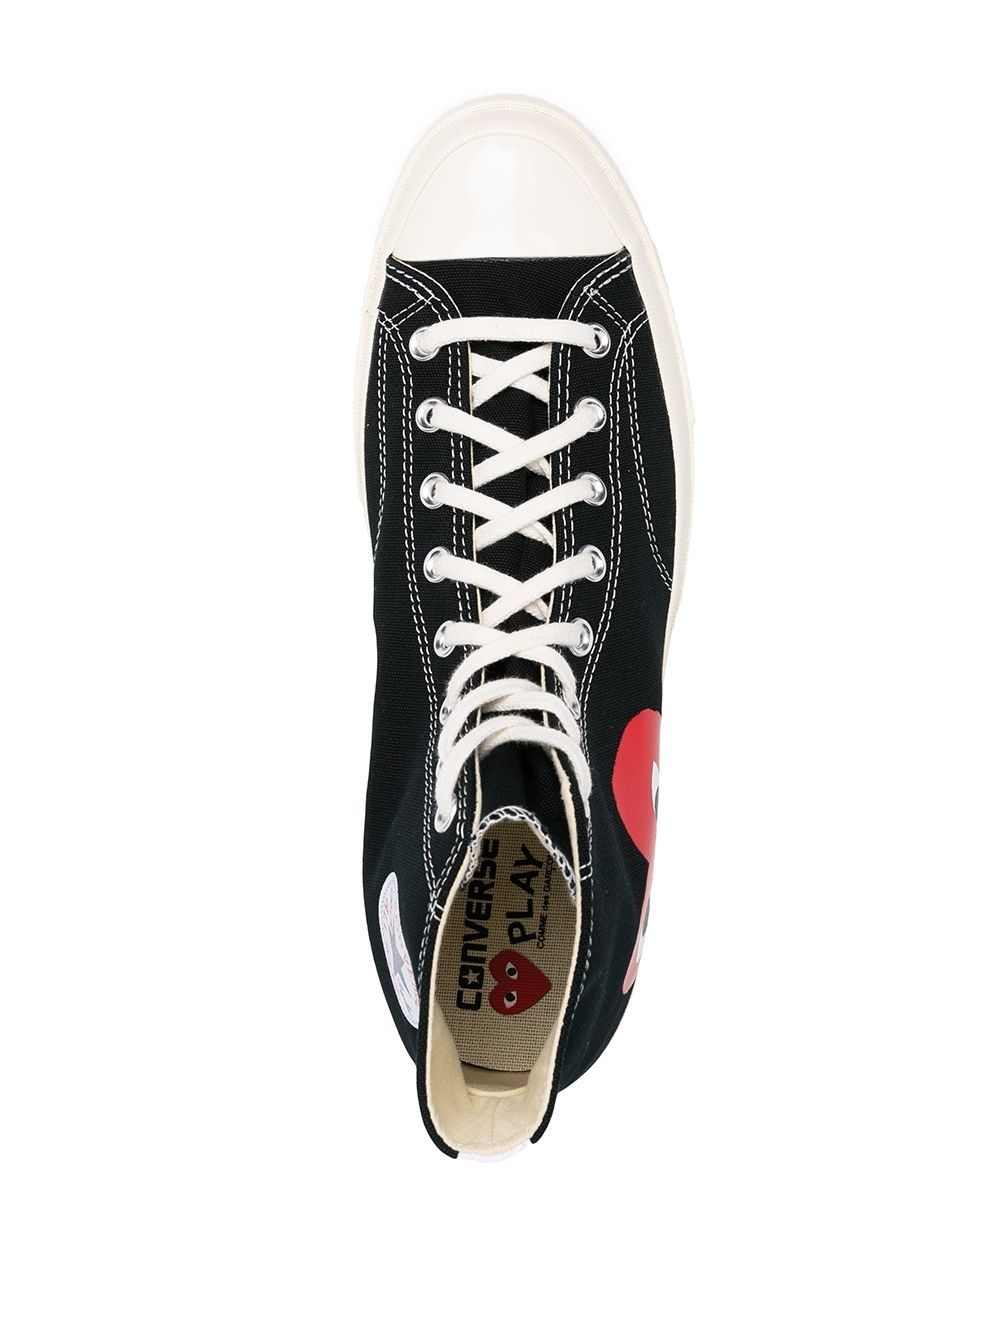 Black/red/white canvas x Converse high-top sneakers